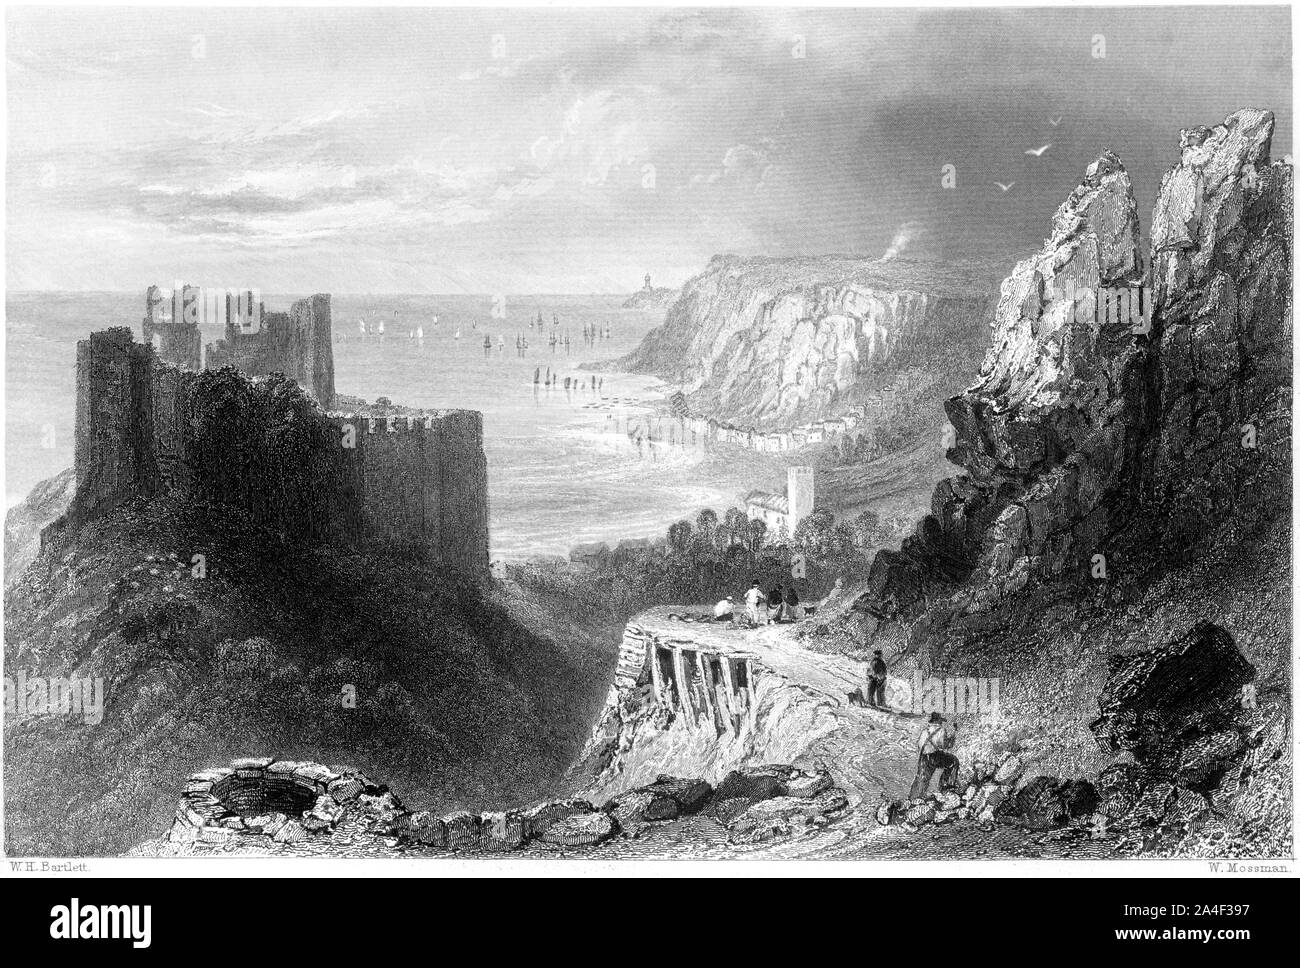 An engraving of Oystermouth (Swansea Bay) scanned at high resolution from a book printed in 1842.  Believed copyright free. Stock Photo